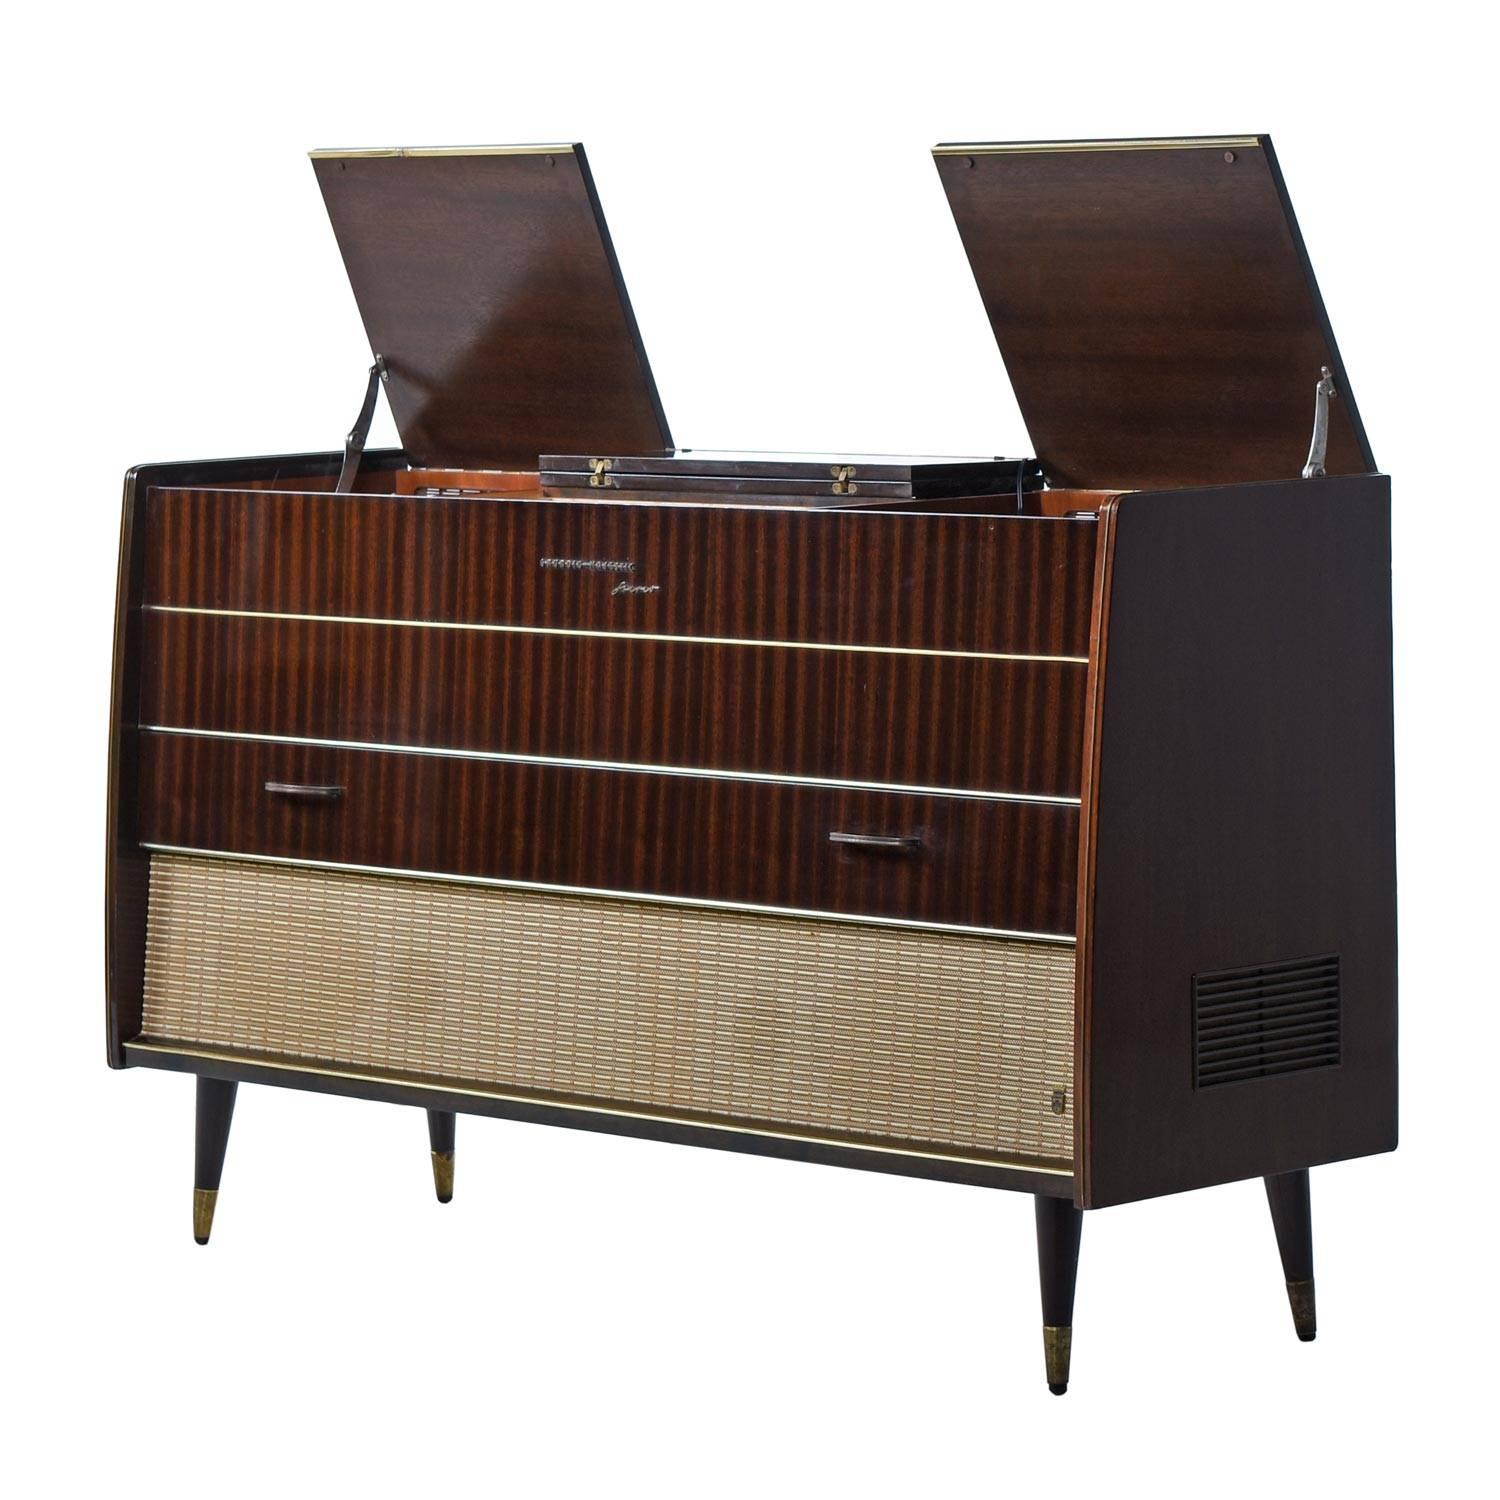 Not only does this 1950s German modern style cabinet look beautiful, but the combination of original and new components sound absolutely amazing. Audiophiles and casual listeners will both appreciate the presence and warm sounds recreated by the